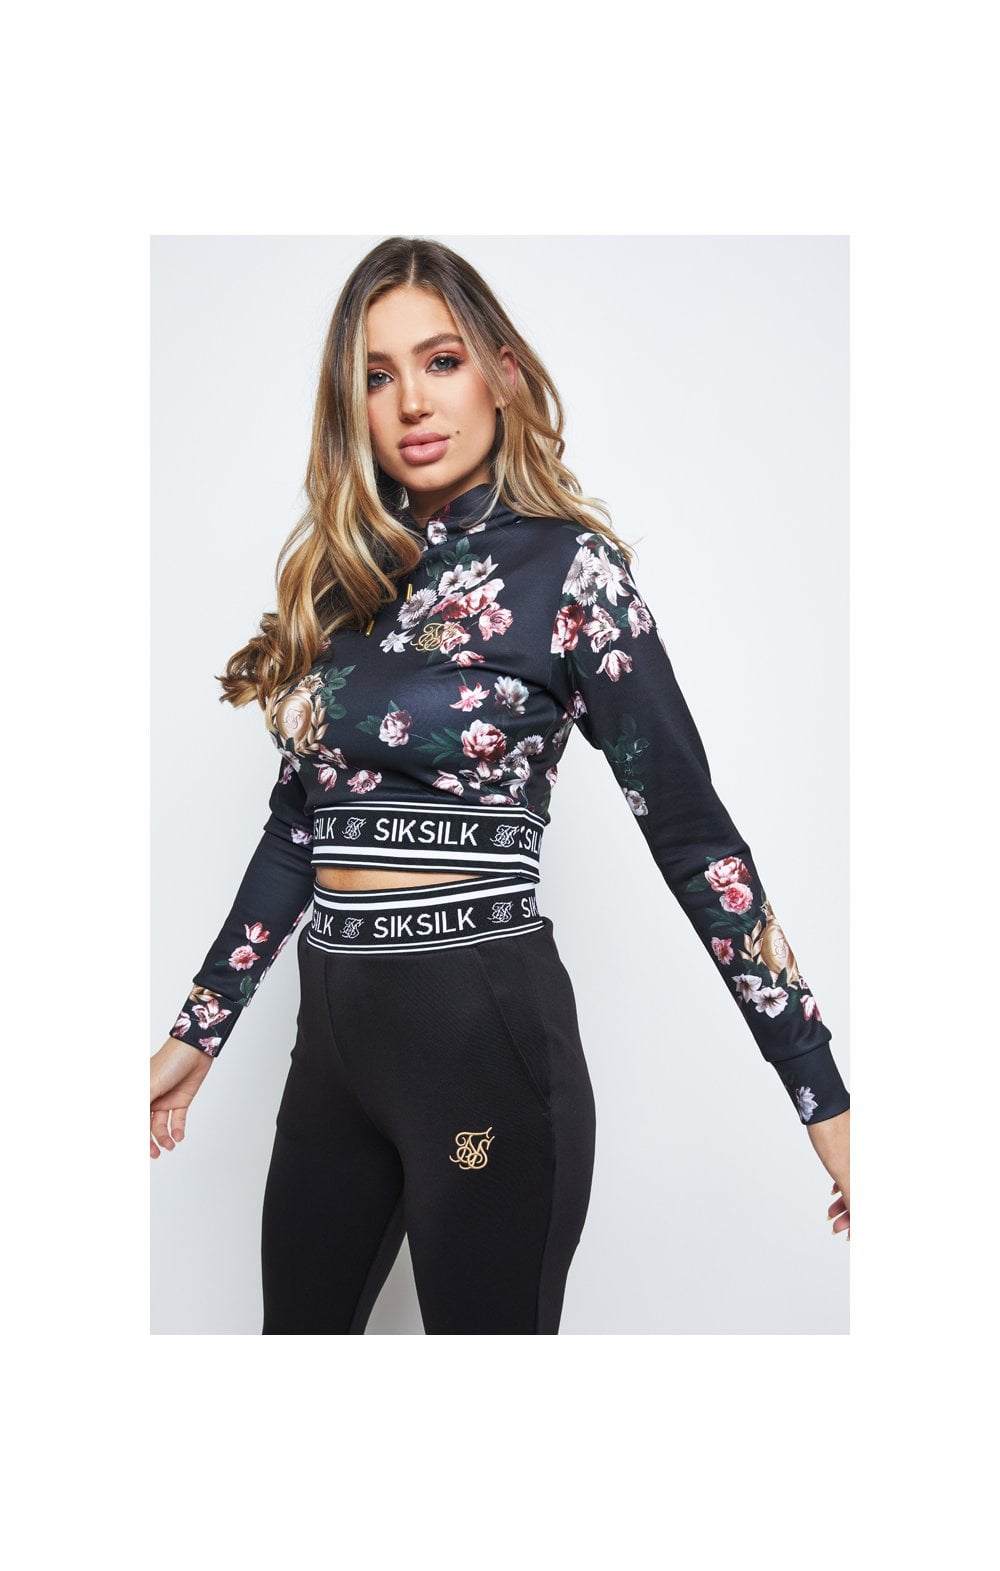 Load image into Gallery viewer, SikSilk Prestige Floral Track Top - Black (2)